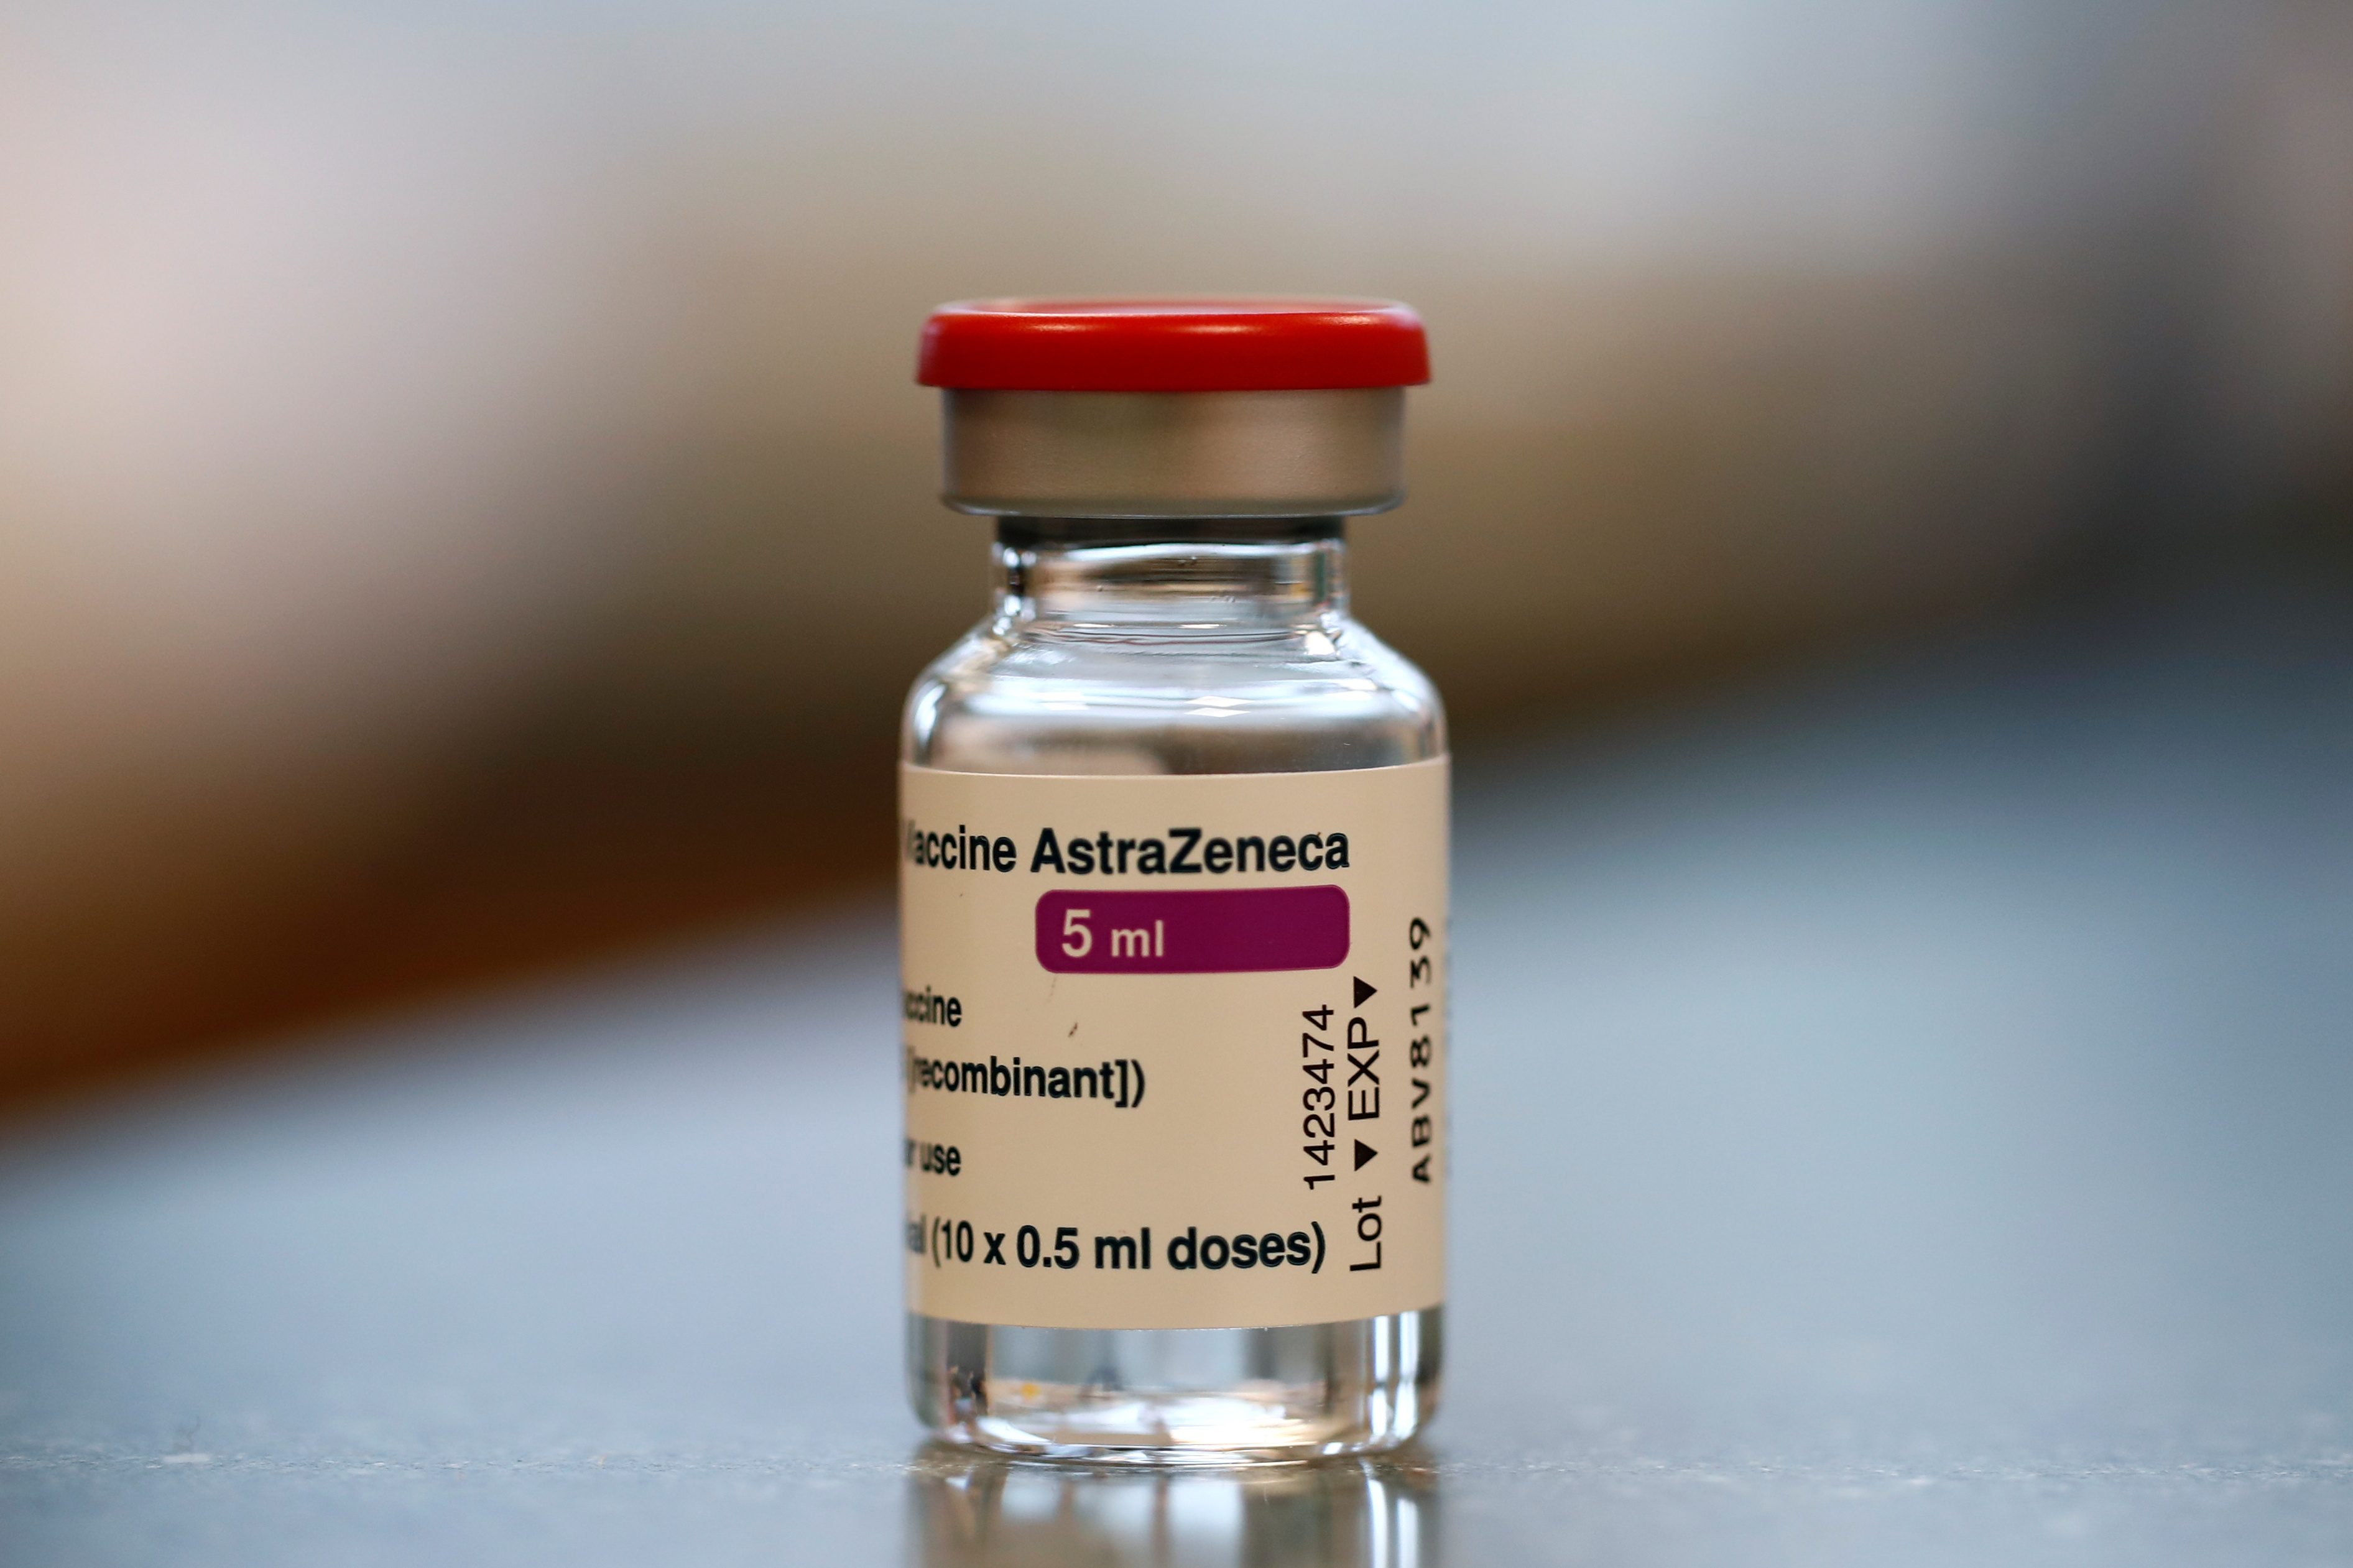 Asia speeds up AstraZeneca COVID-19 vaccine rollouts, even as trust plunges in Europe